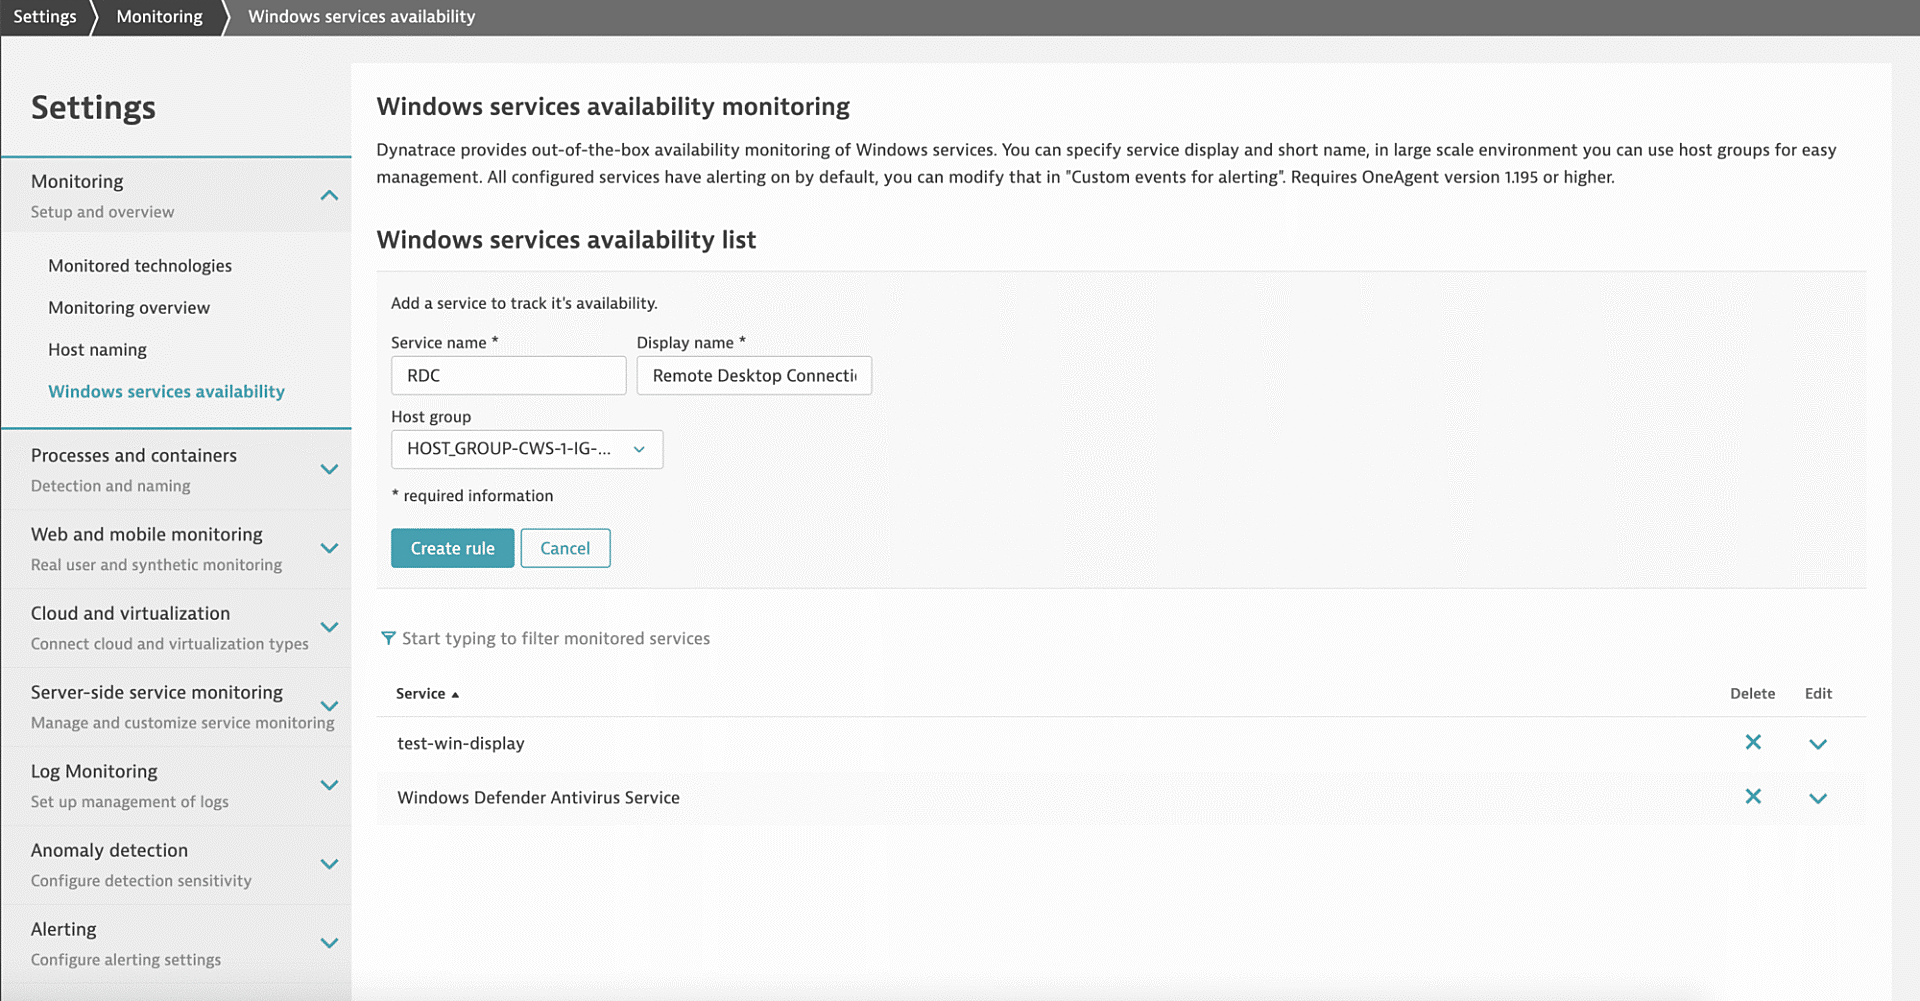 Windows services availability monitoring in Dynatrace screenshot